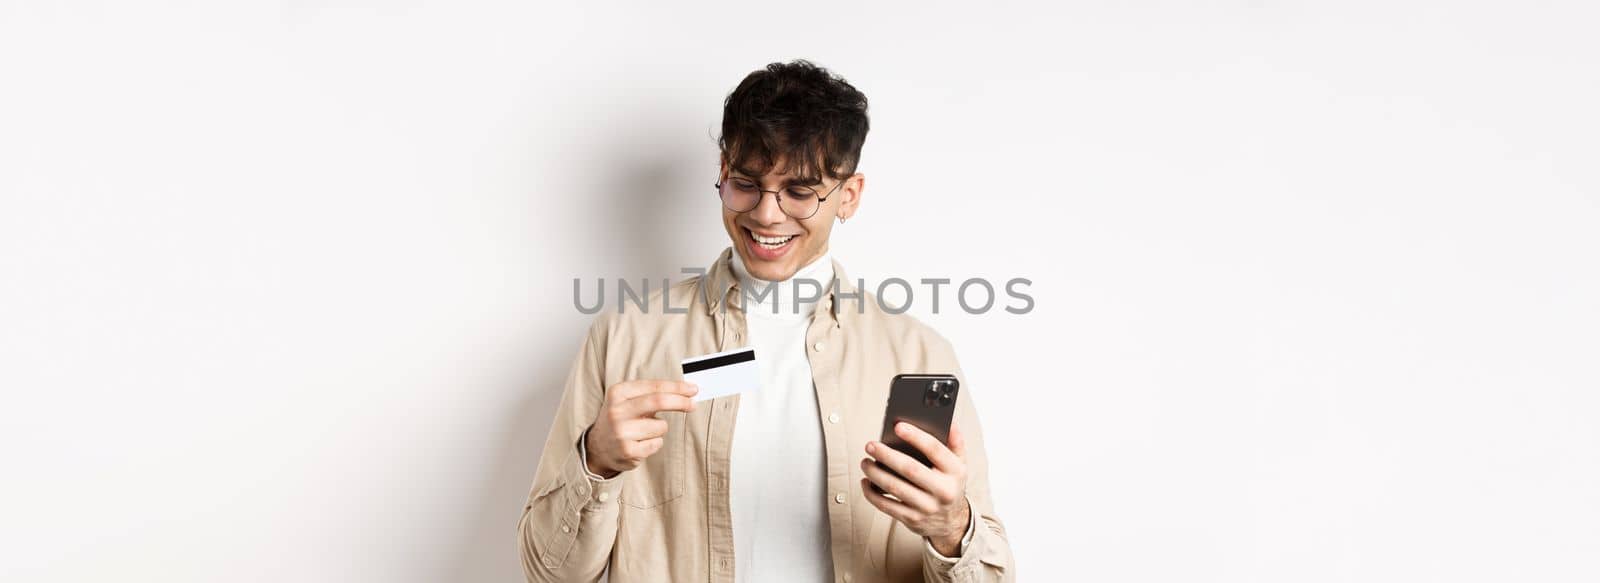 Happy young guy in glasses making online purchase, looking at plastic credit card and holding smartphone, standing on white background.